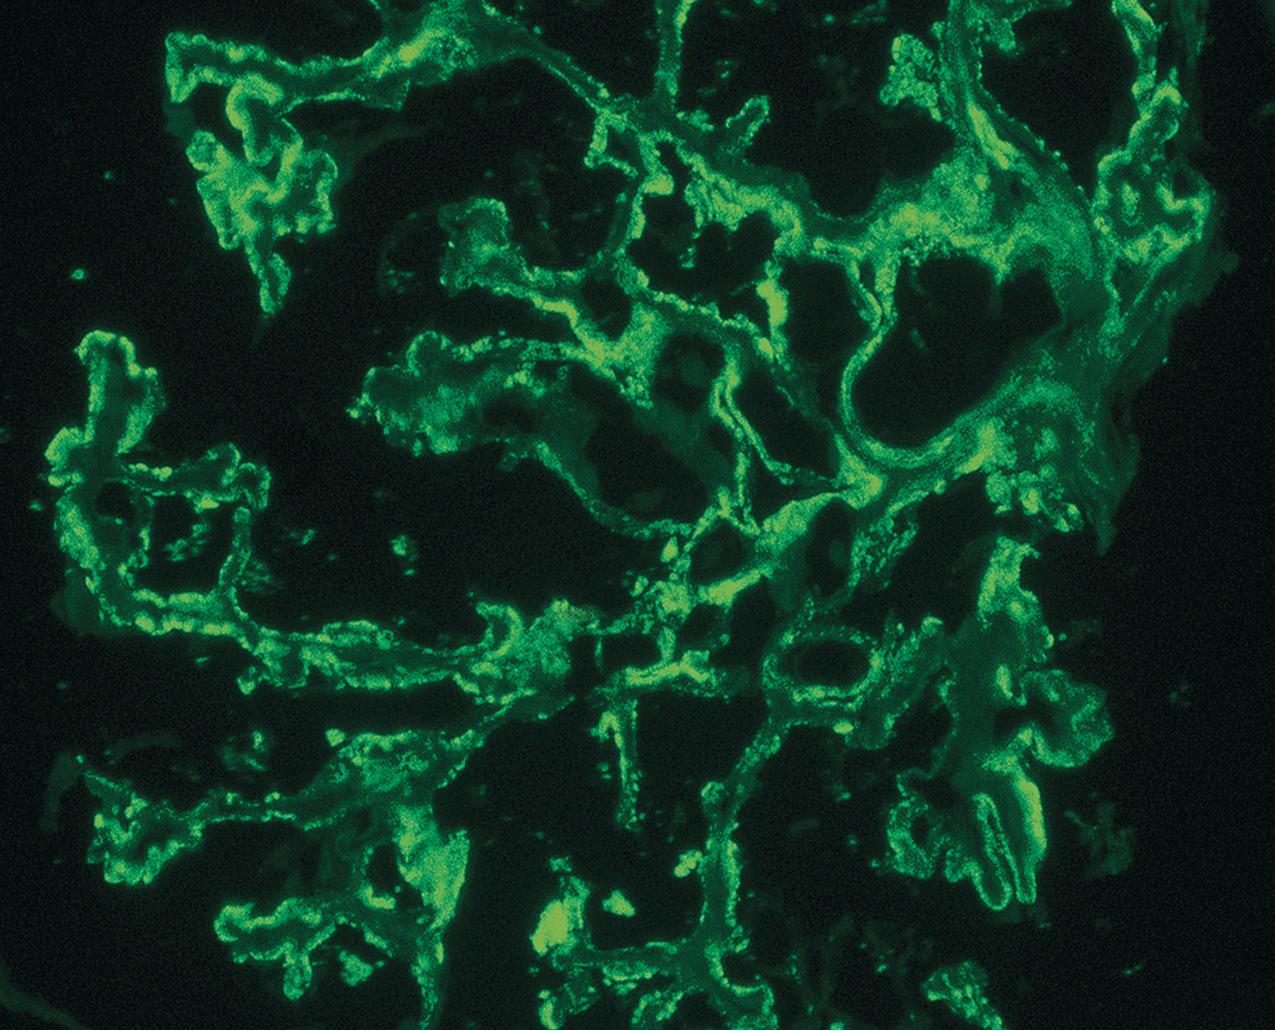 FIG. 3.116, Fibrillary glomerulonephritis may also show a membranous pattern of deposits in some cases, with corresponding coarsely granular peripheral loop deposits, along with coarse mesangial deposits as shown here (anti-IgG immunofluorescence, ×400).